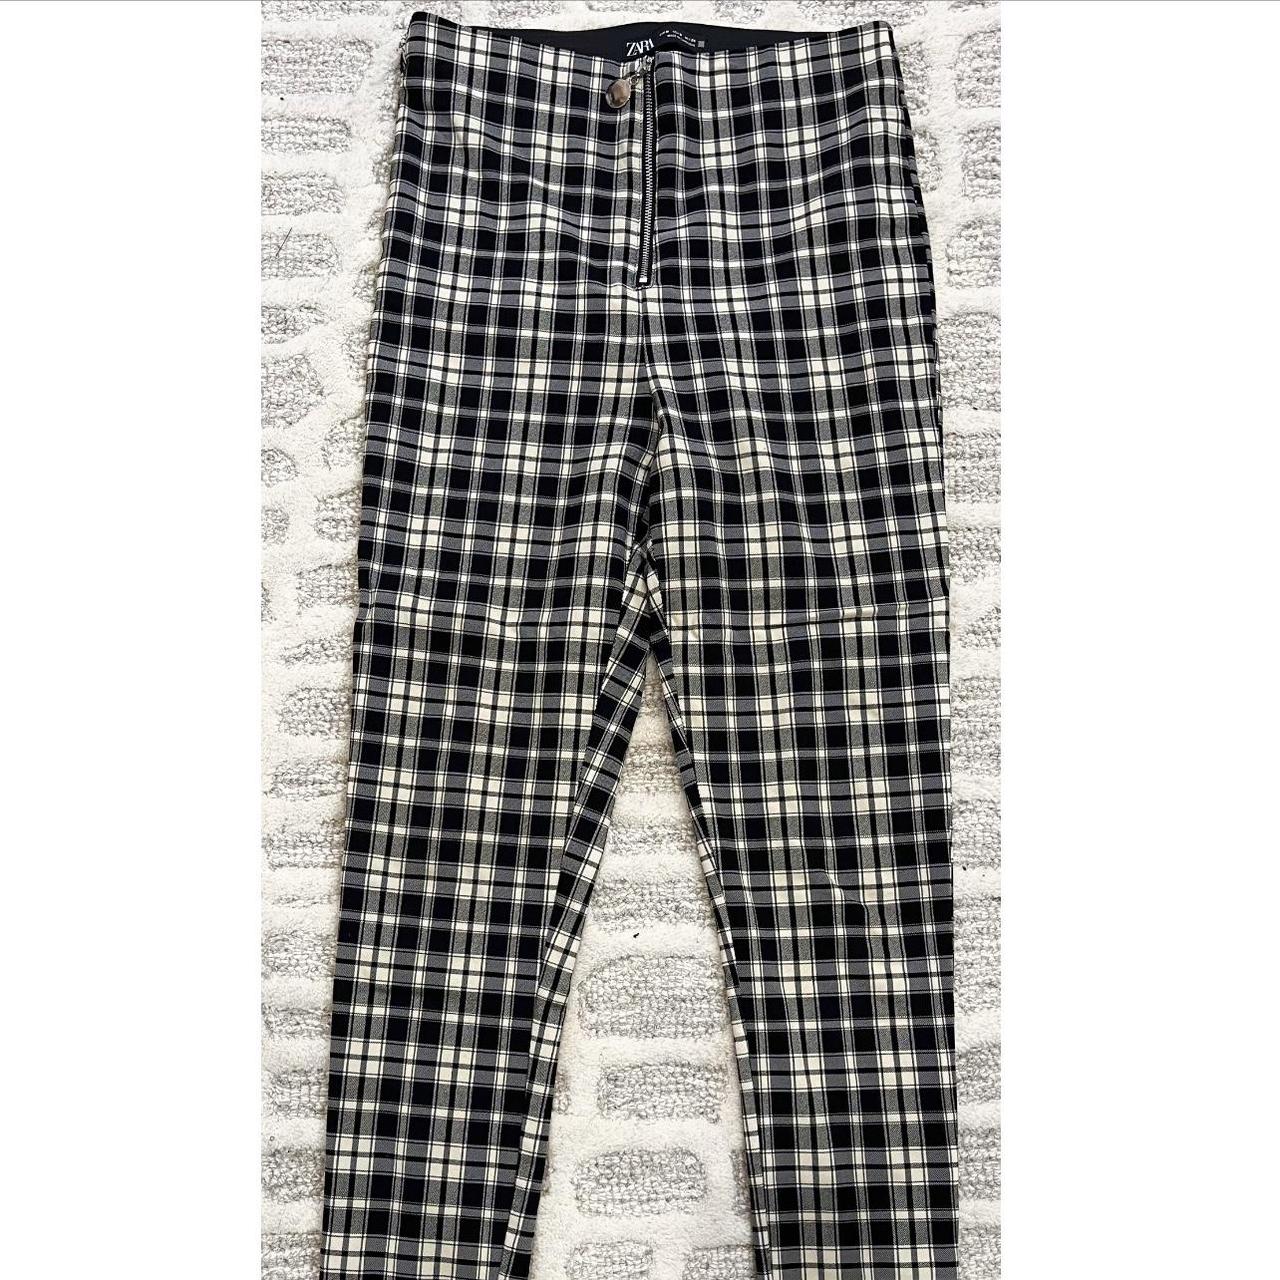 Zara Plaid TRF Collection Pants Women's Size Small, Pockets and Side Ankle  Vent | eBay